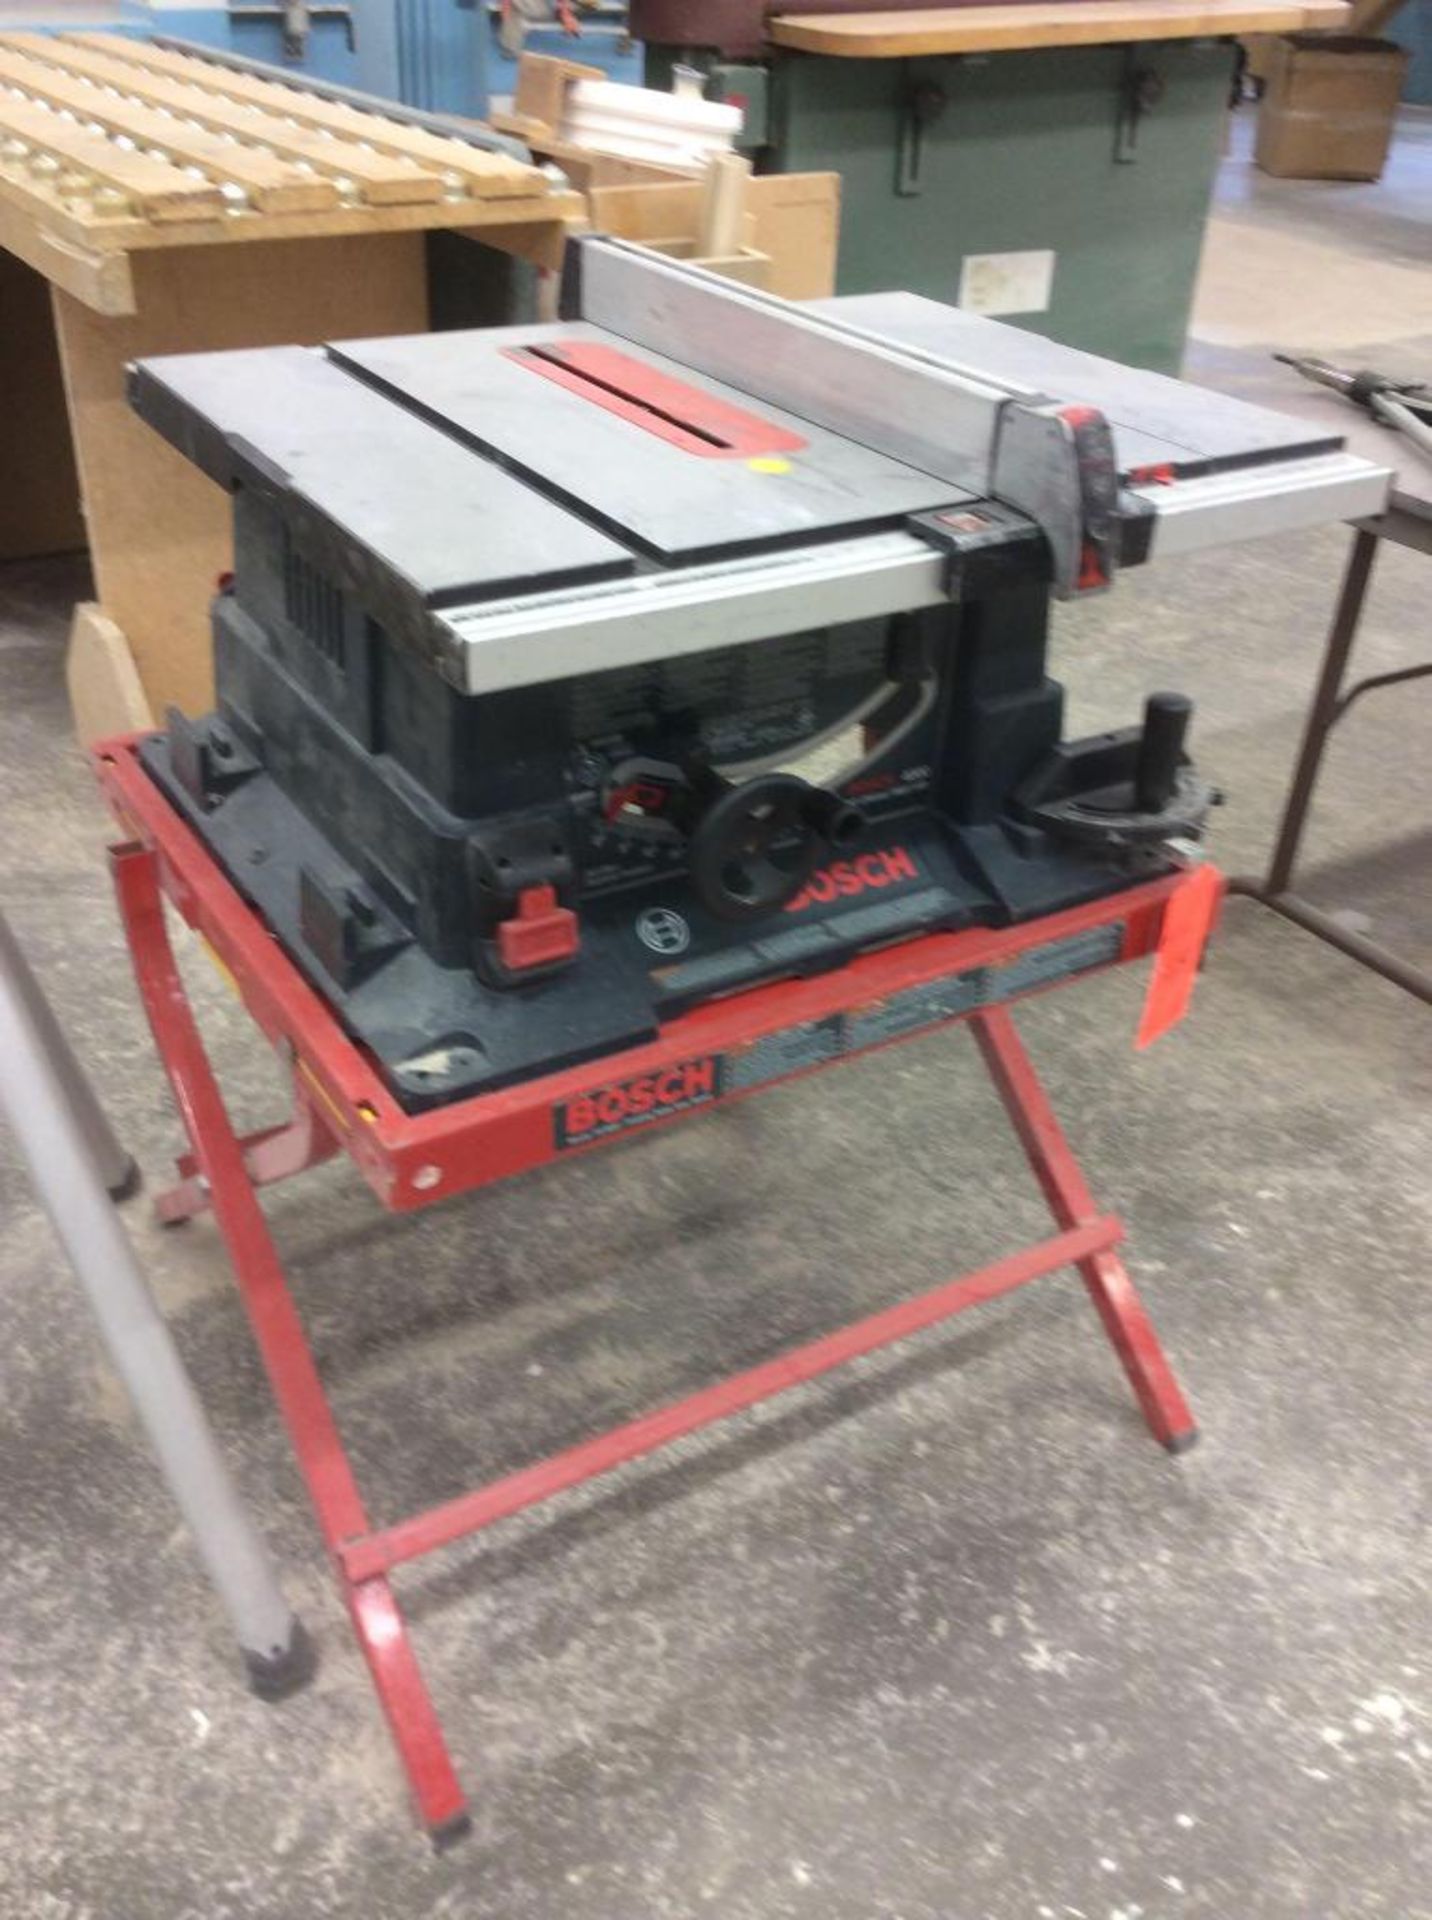 Bosch 4000 10" tilting arbor, portable table saw, 1 ph, with, Bosch TS 1000 folding table saw stand. - Image 3 of 3